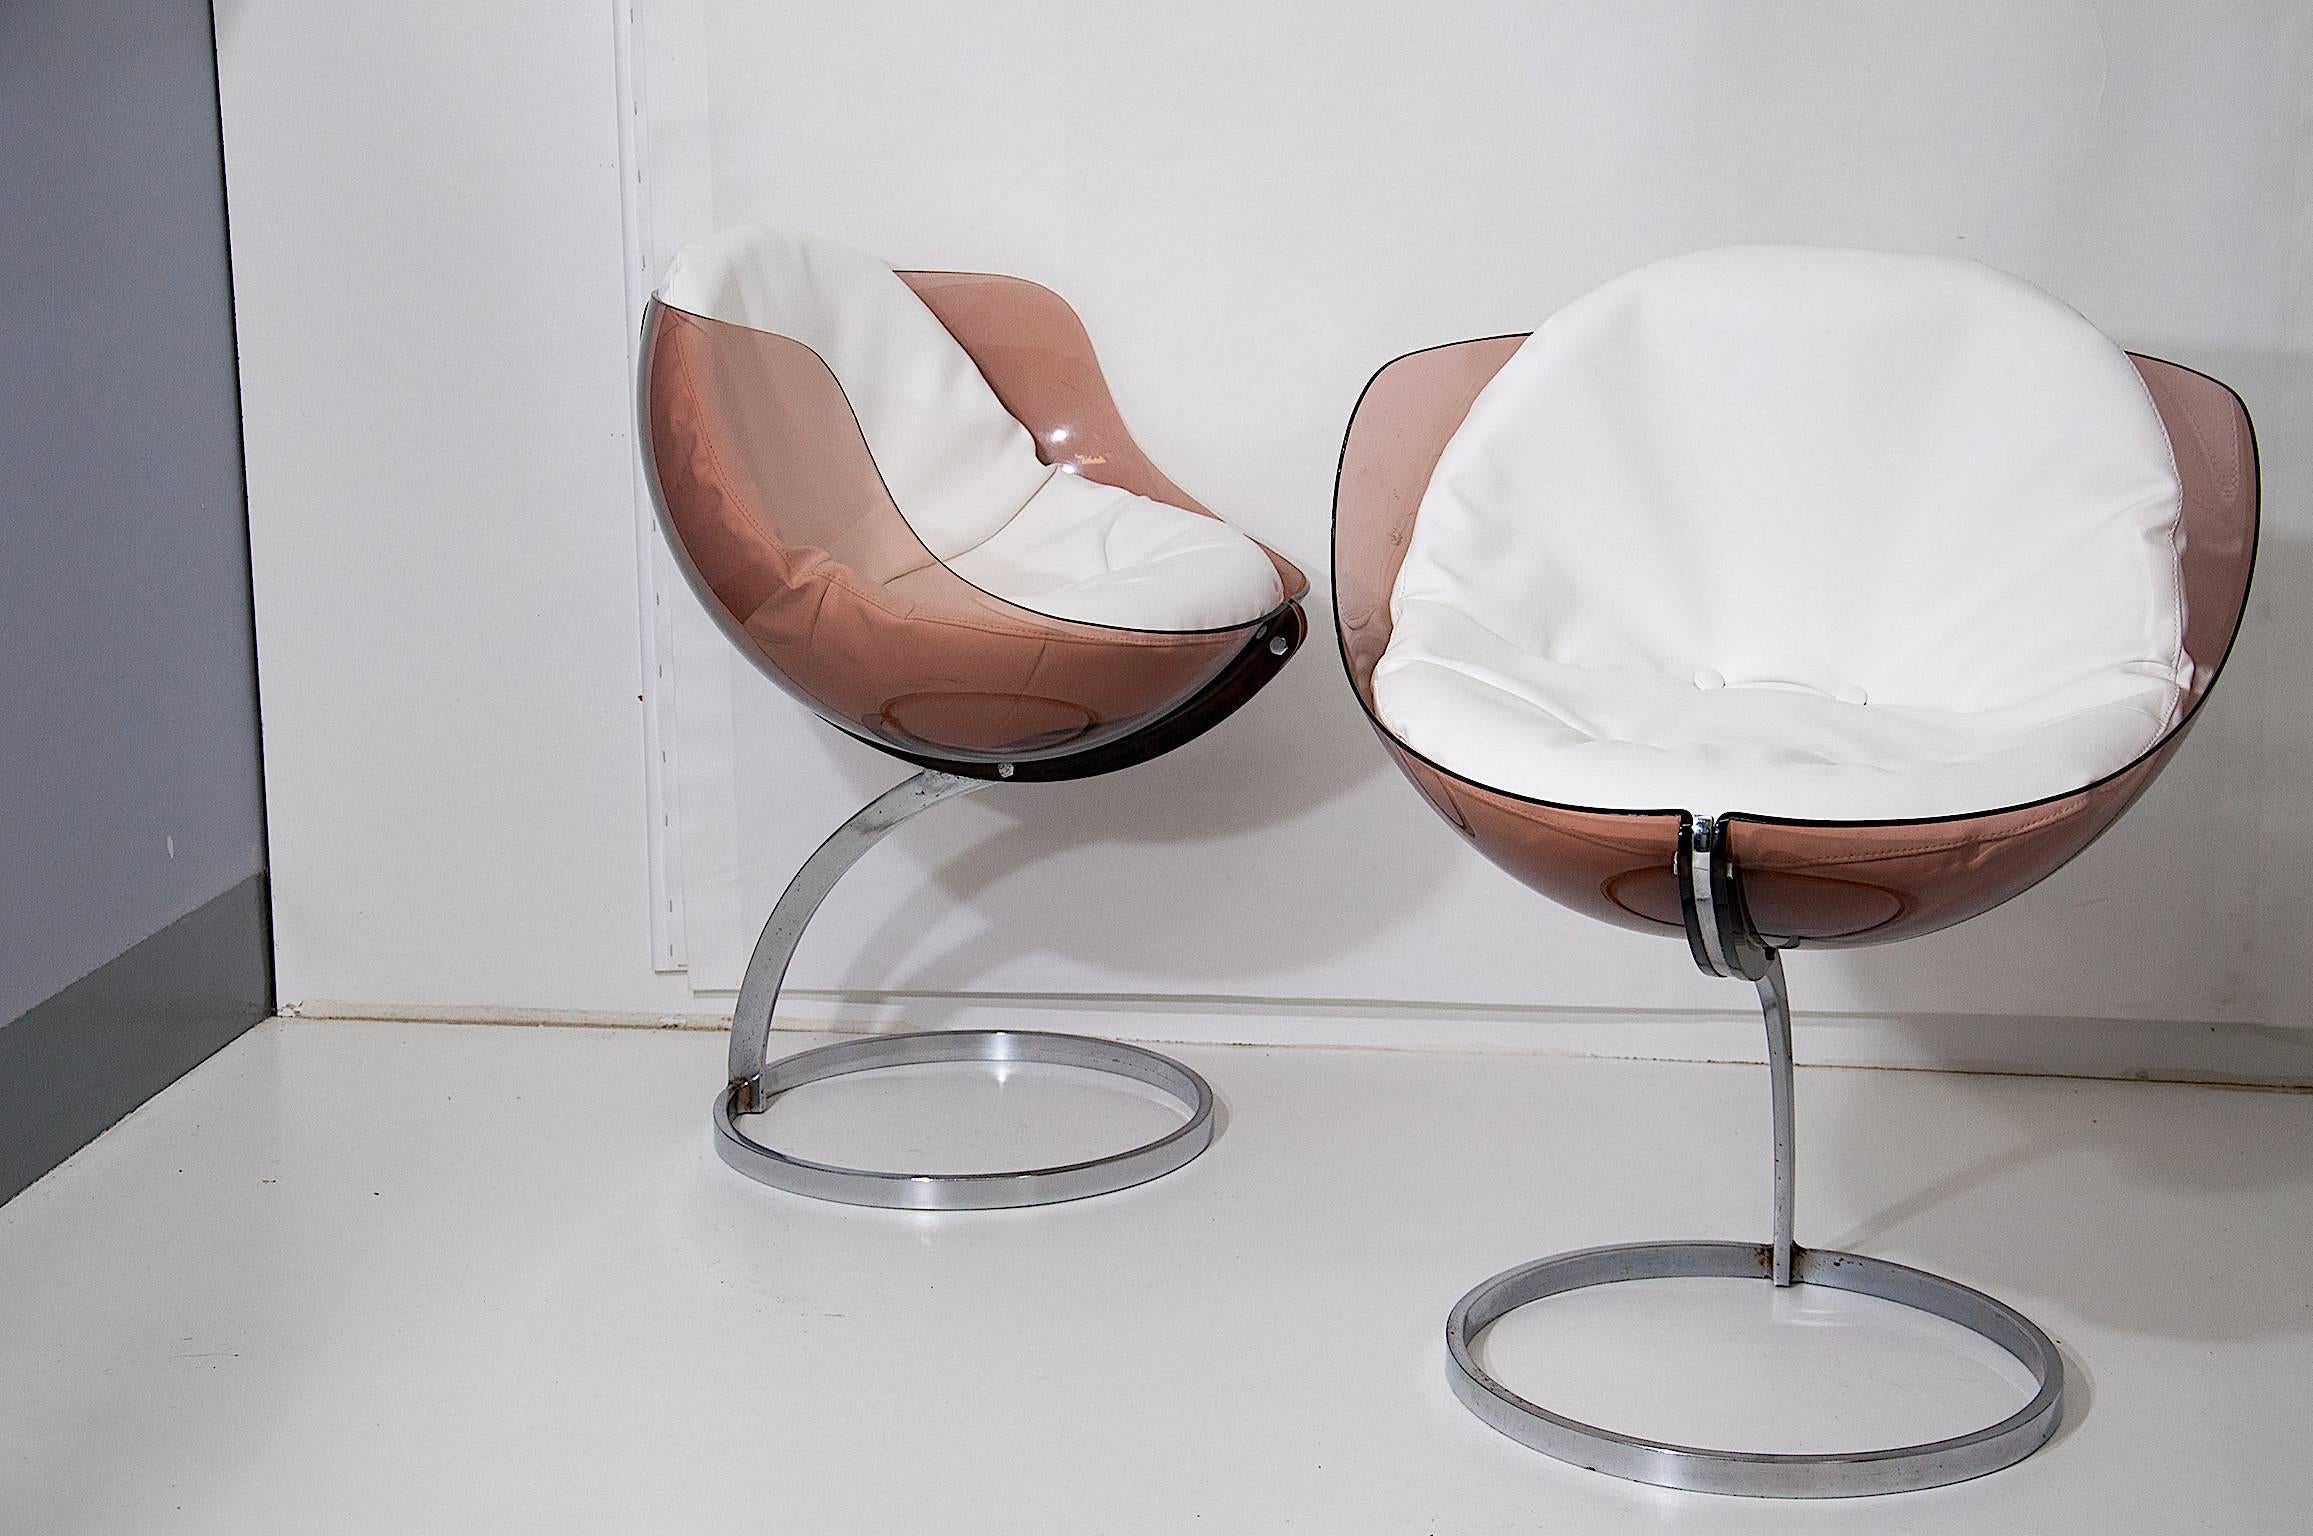 Pair of Boris Tabacoff sphere chairs for Mobilier Modulaire Moderne
Re-upholstered armchair, done exactly like the original, by a cellar.